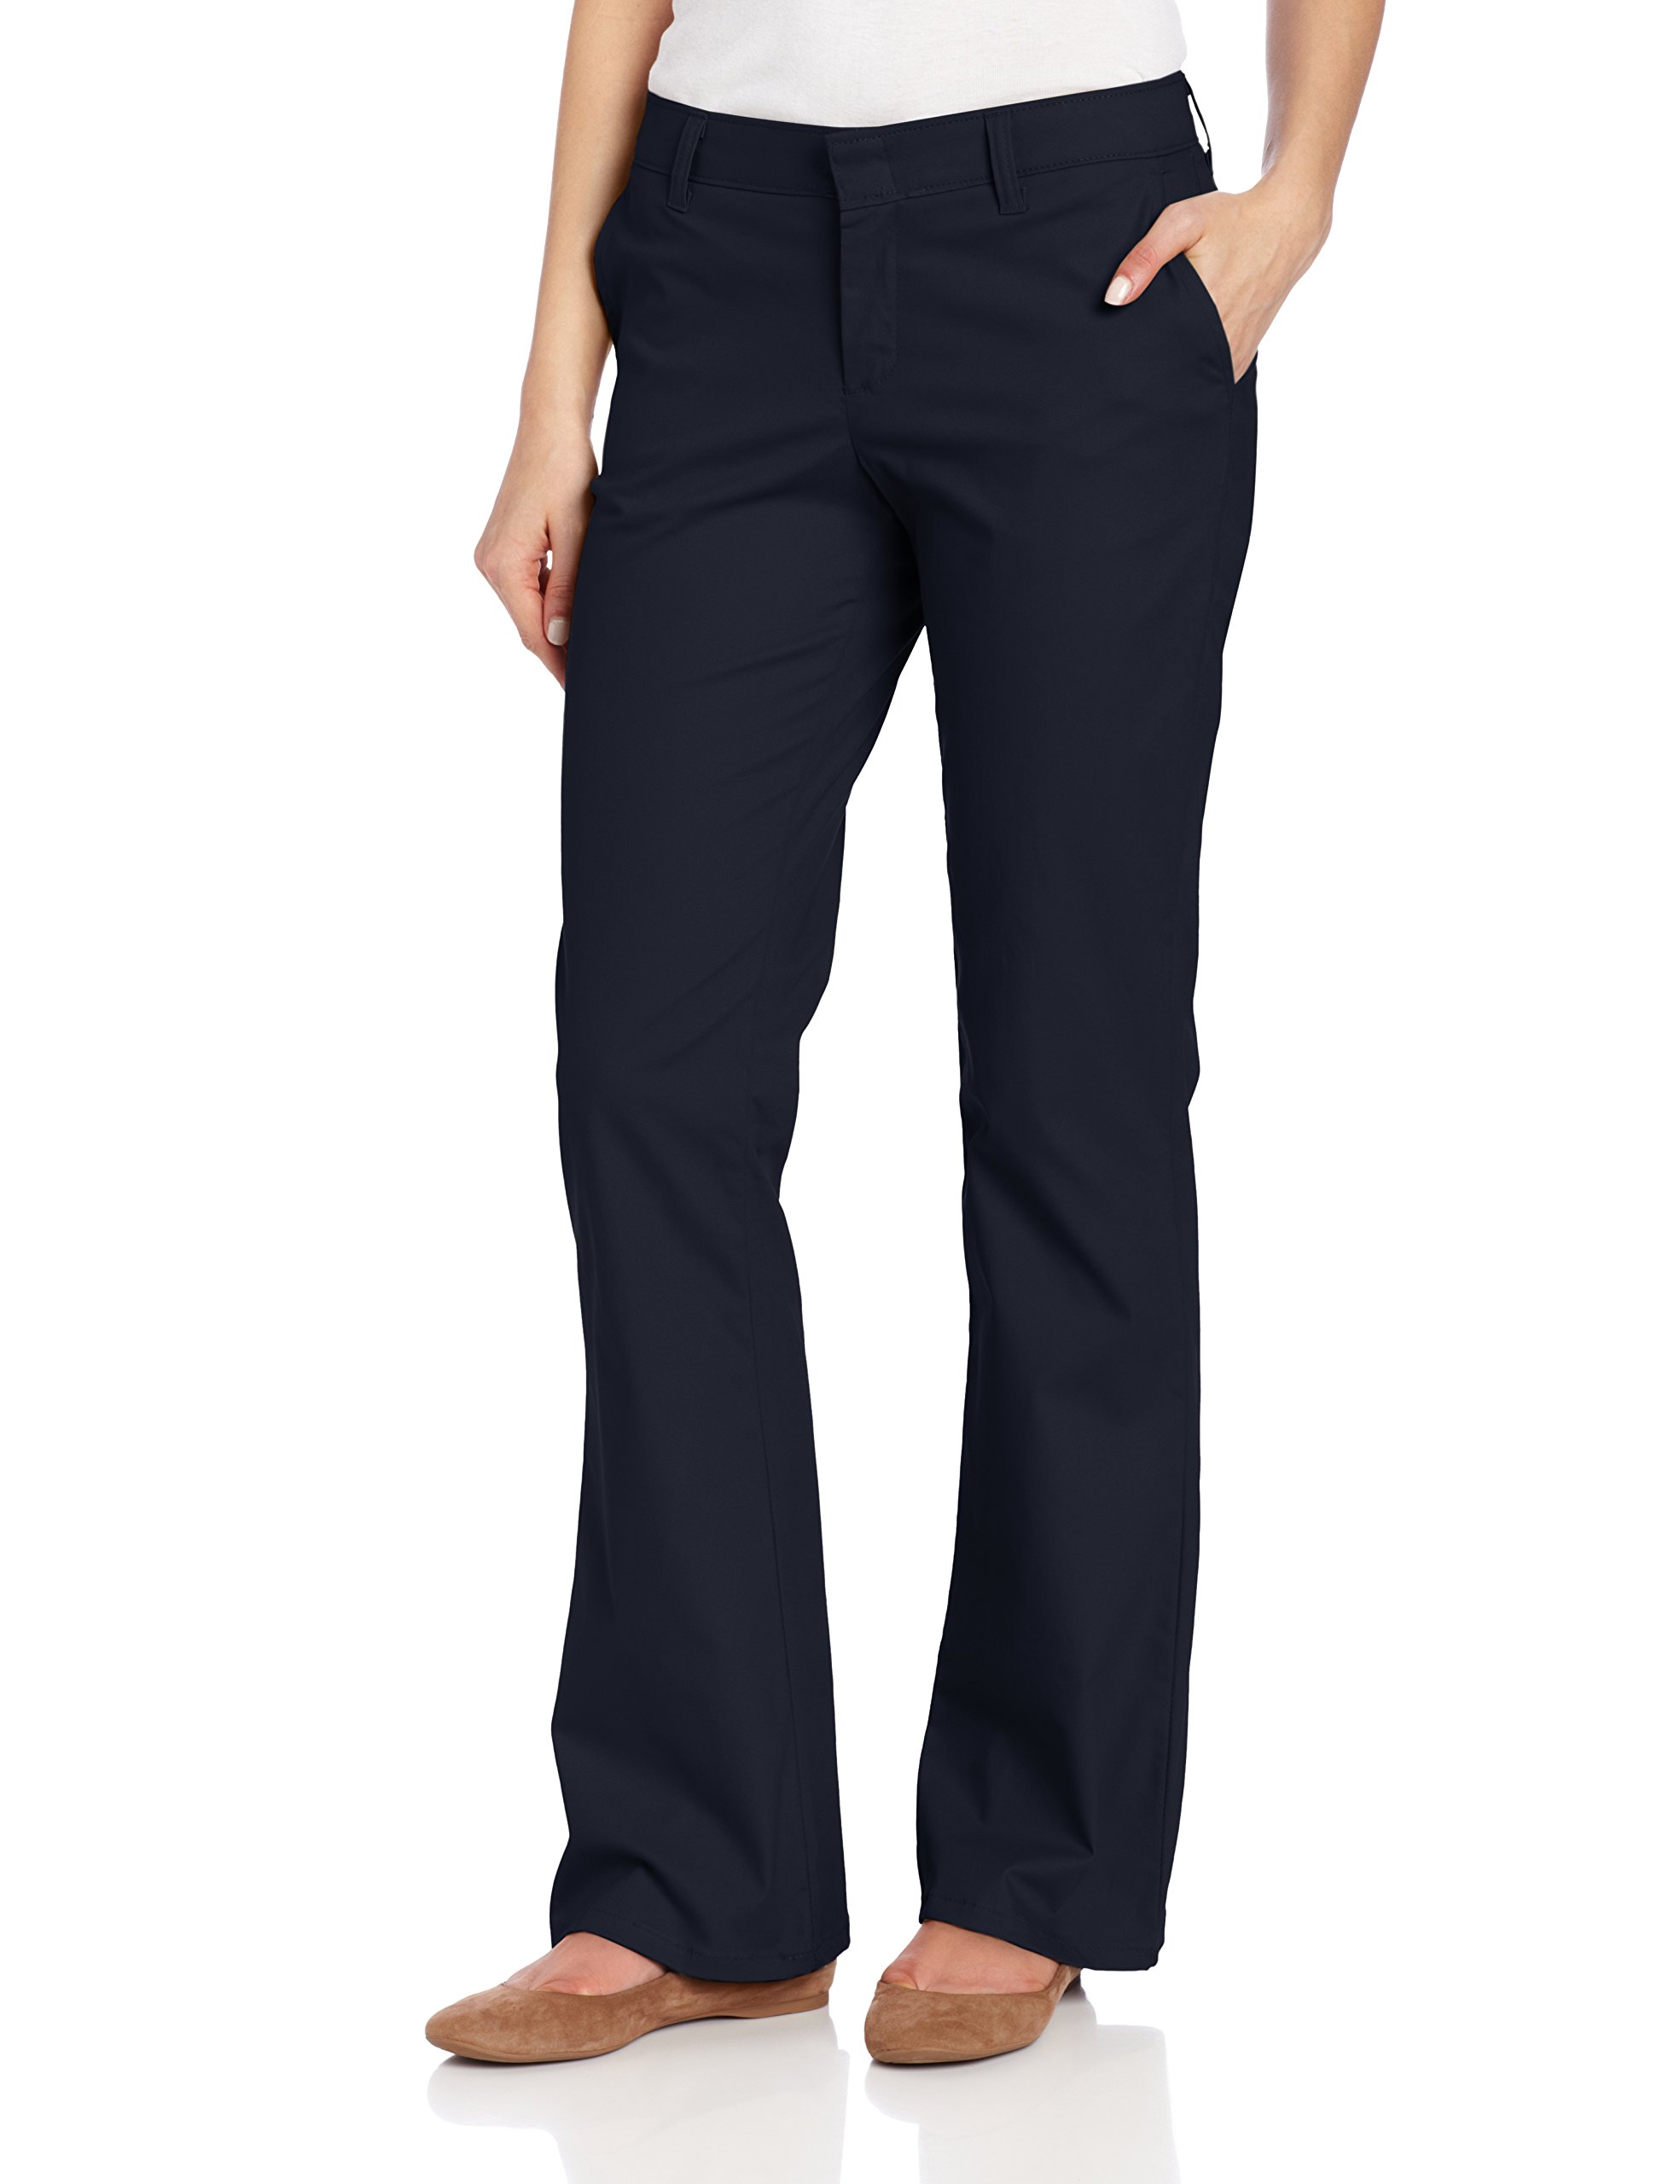 Flat Front Stretch Twill Pant Slim Fit Bootcut SALE!